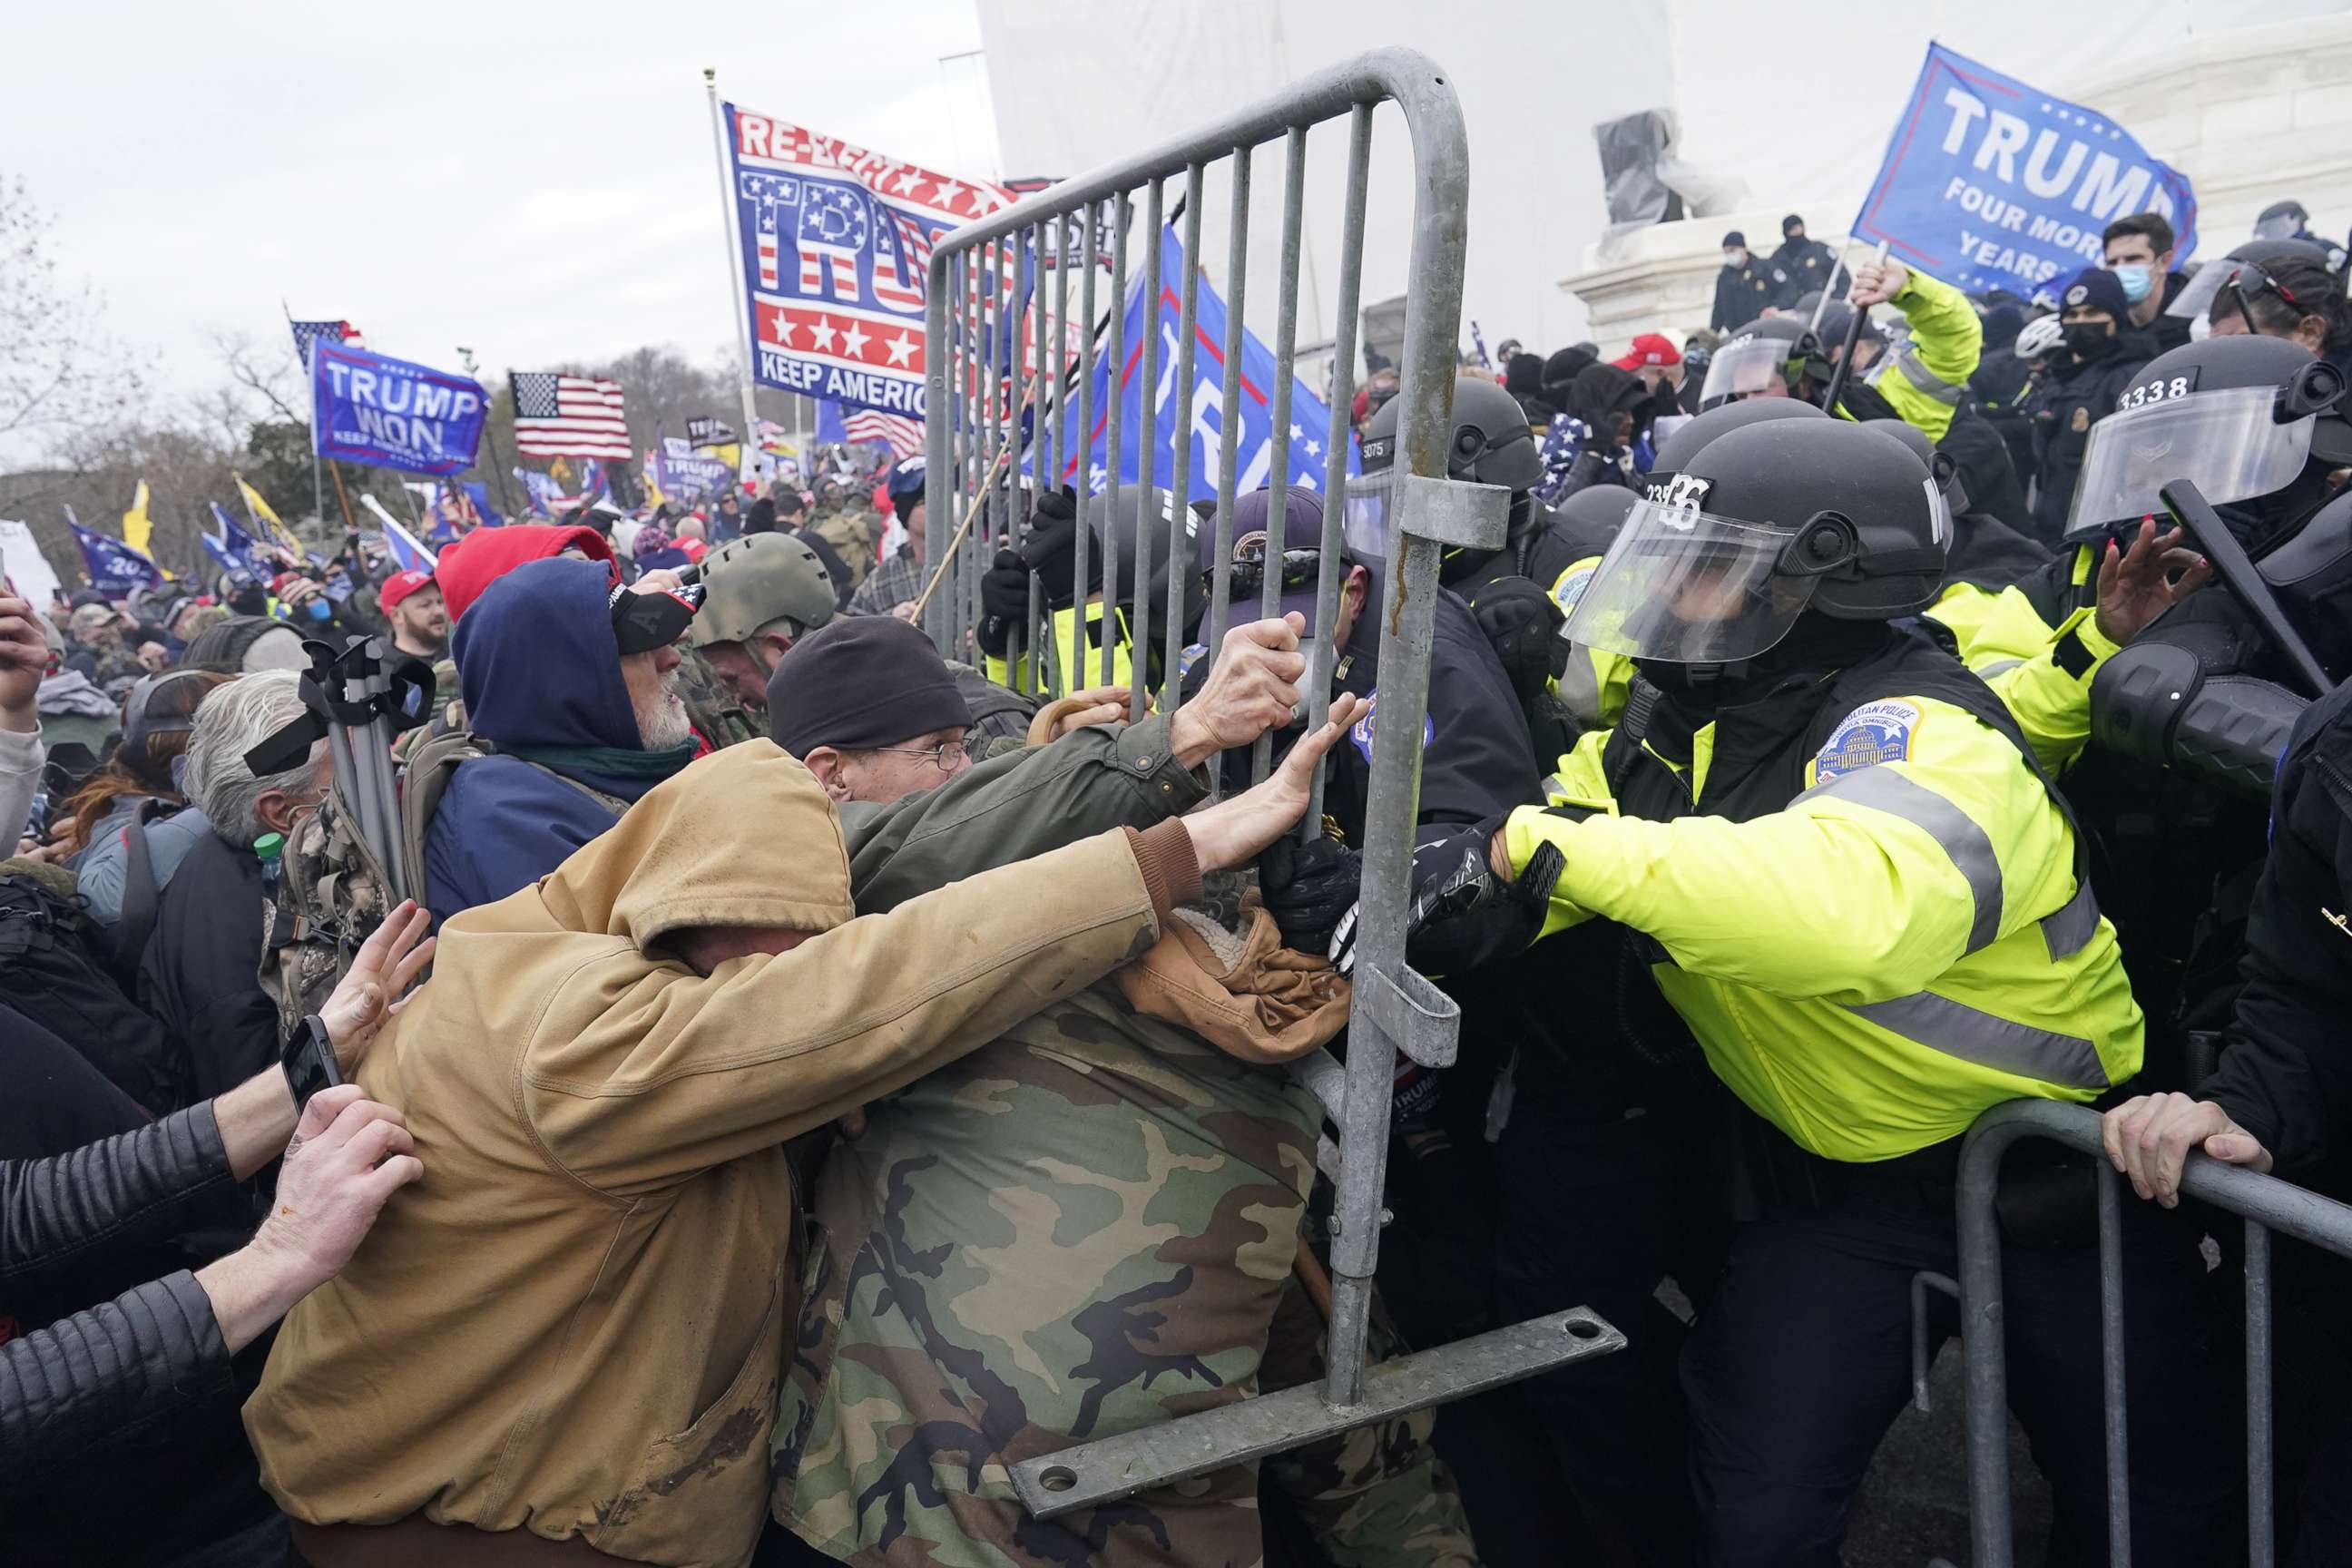 PHOTO: Protesters clash with police outside the U.S. Capitol, Jan. 6, 2021 in Washington.